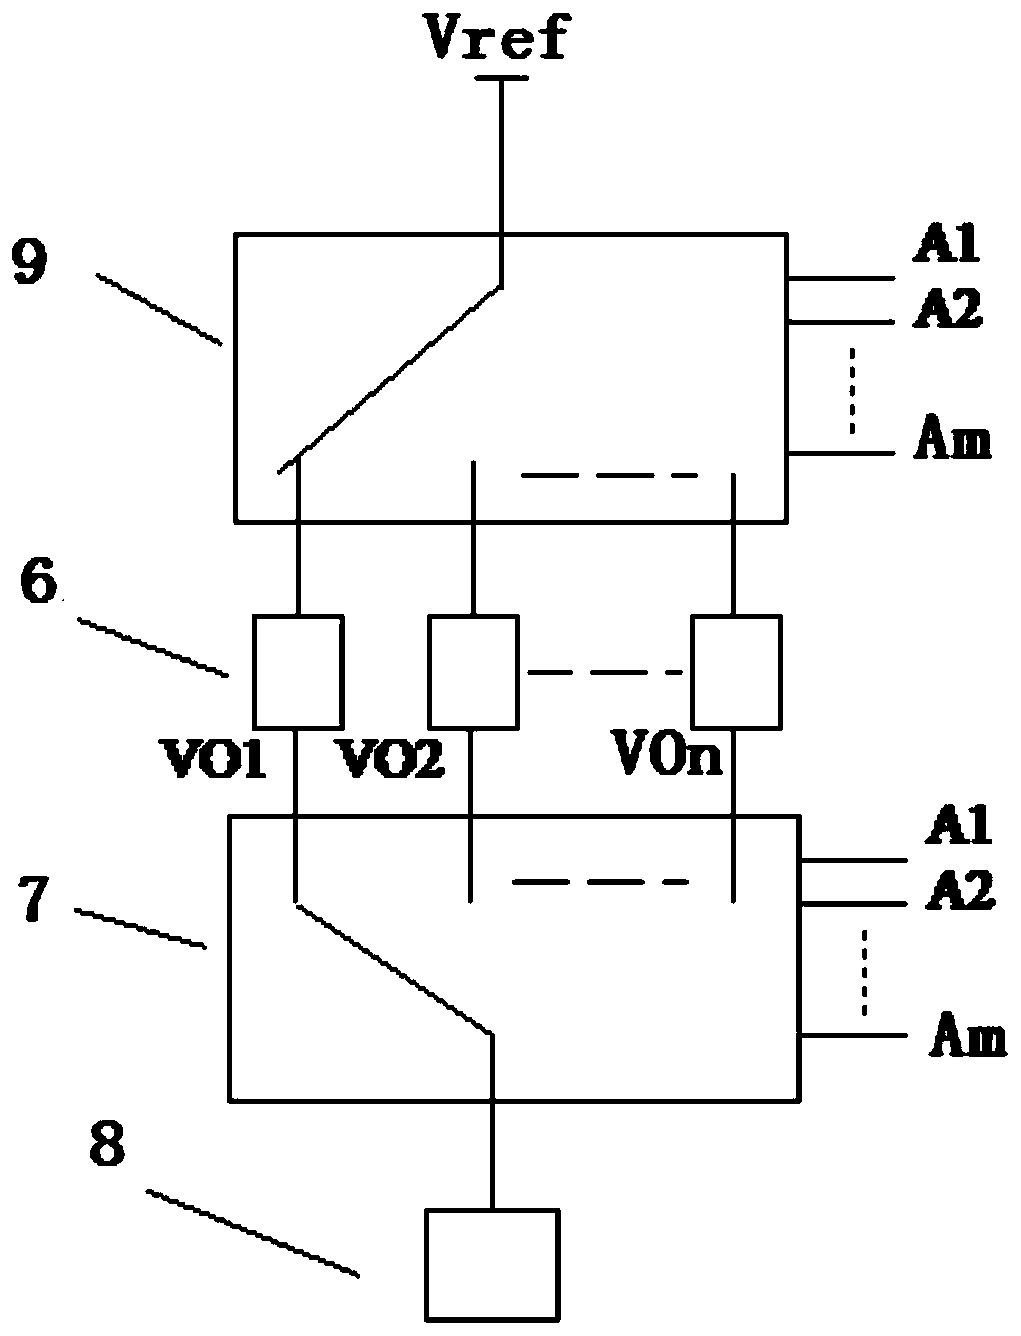 Time-sharing power supply and data acquisition system used for photoconductive type infrared detector array